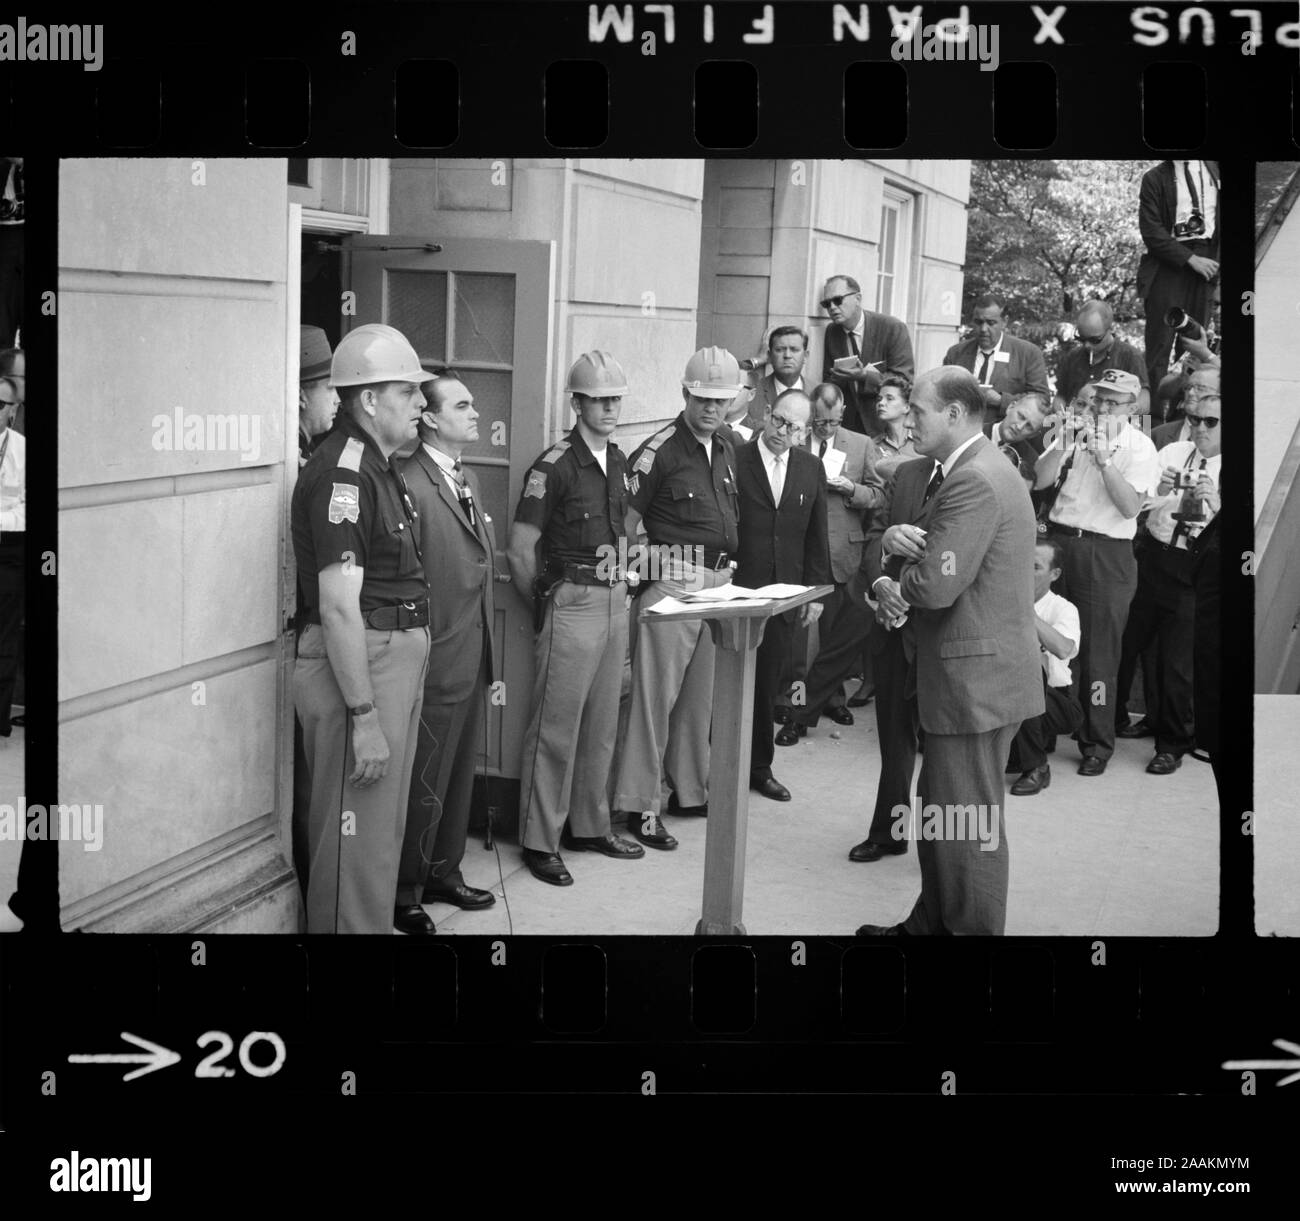 Governor George Wallace attempting to block Integration by standing defiantly at Door while being confronted by Deputy U.S. Attorney General Nicholas Katzenbach, University of Alabama, Tuscaloosa, Alabama, USA, photograph by Warren K. Leffler, June 11, 1963 Stock Photo